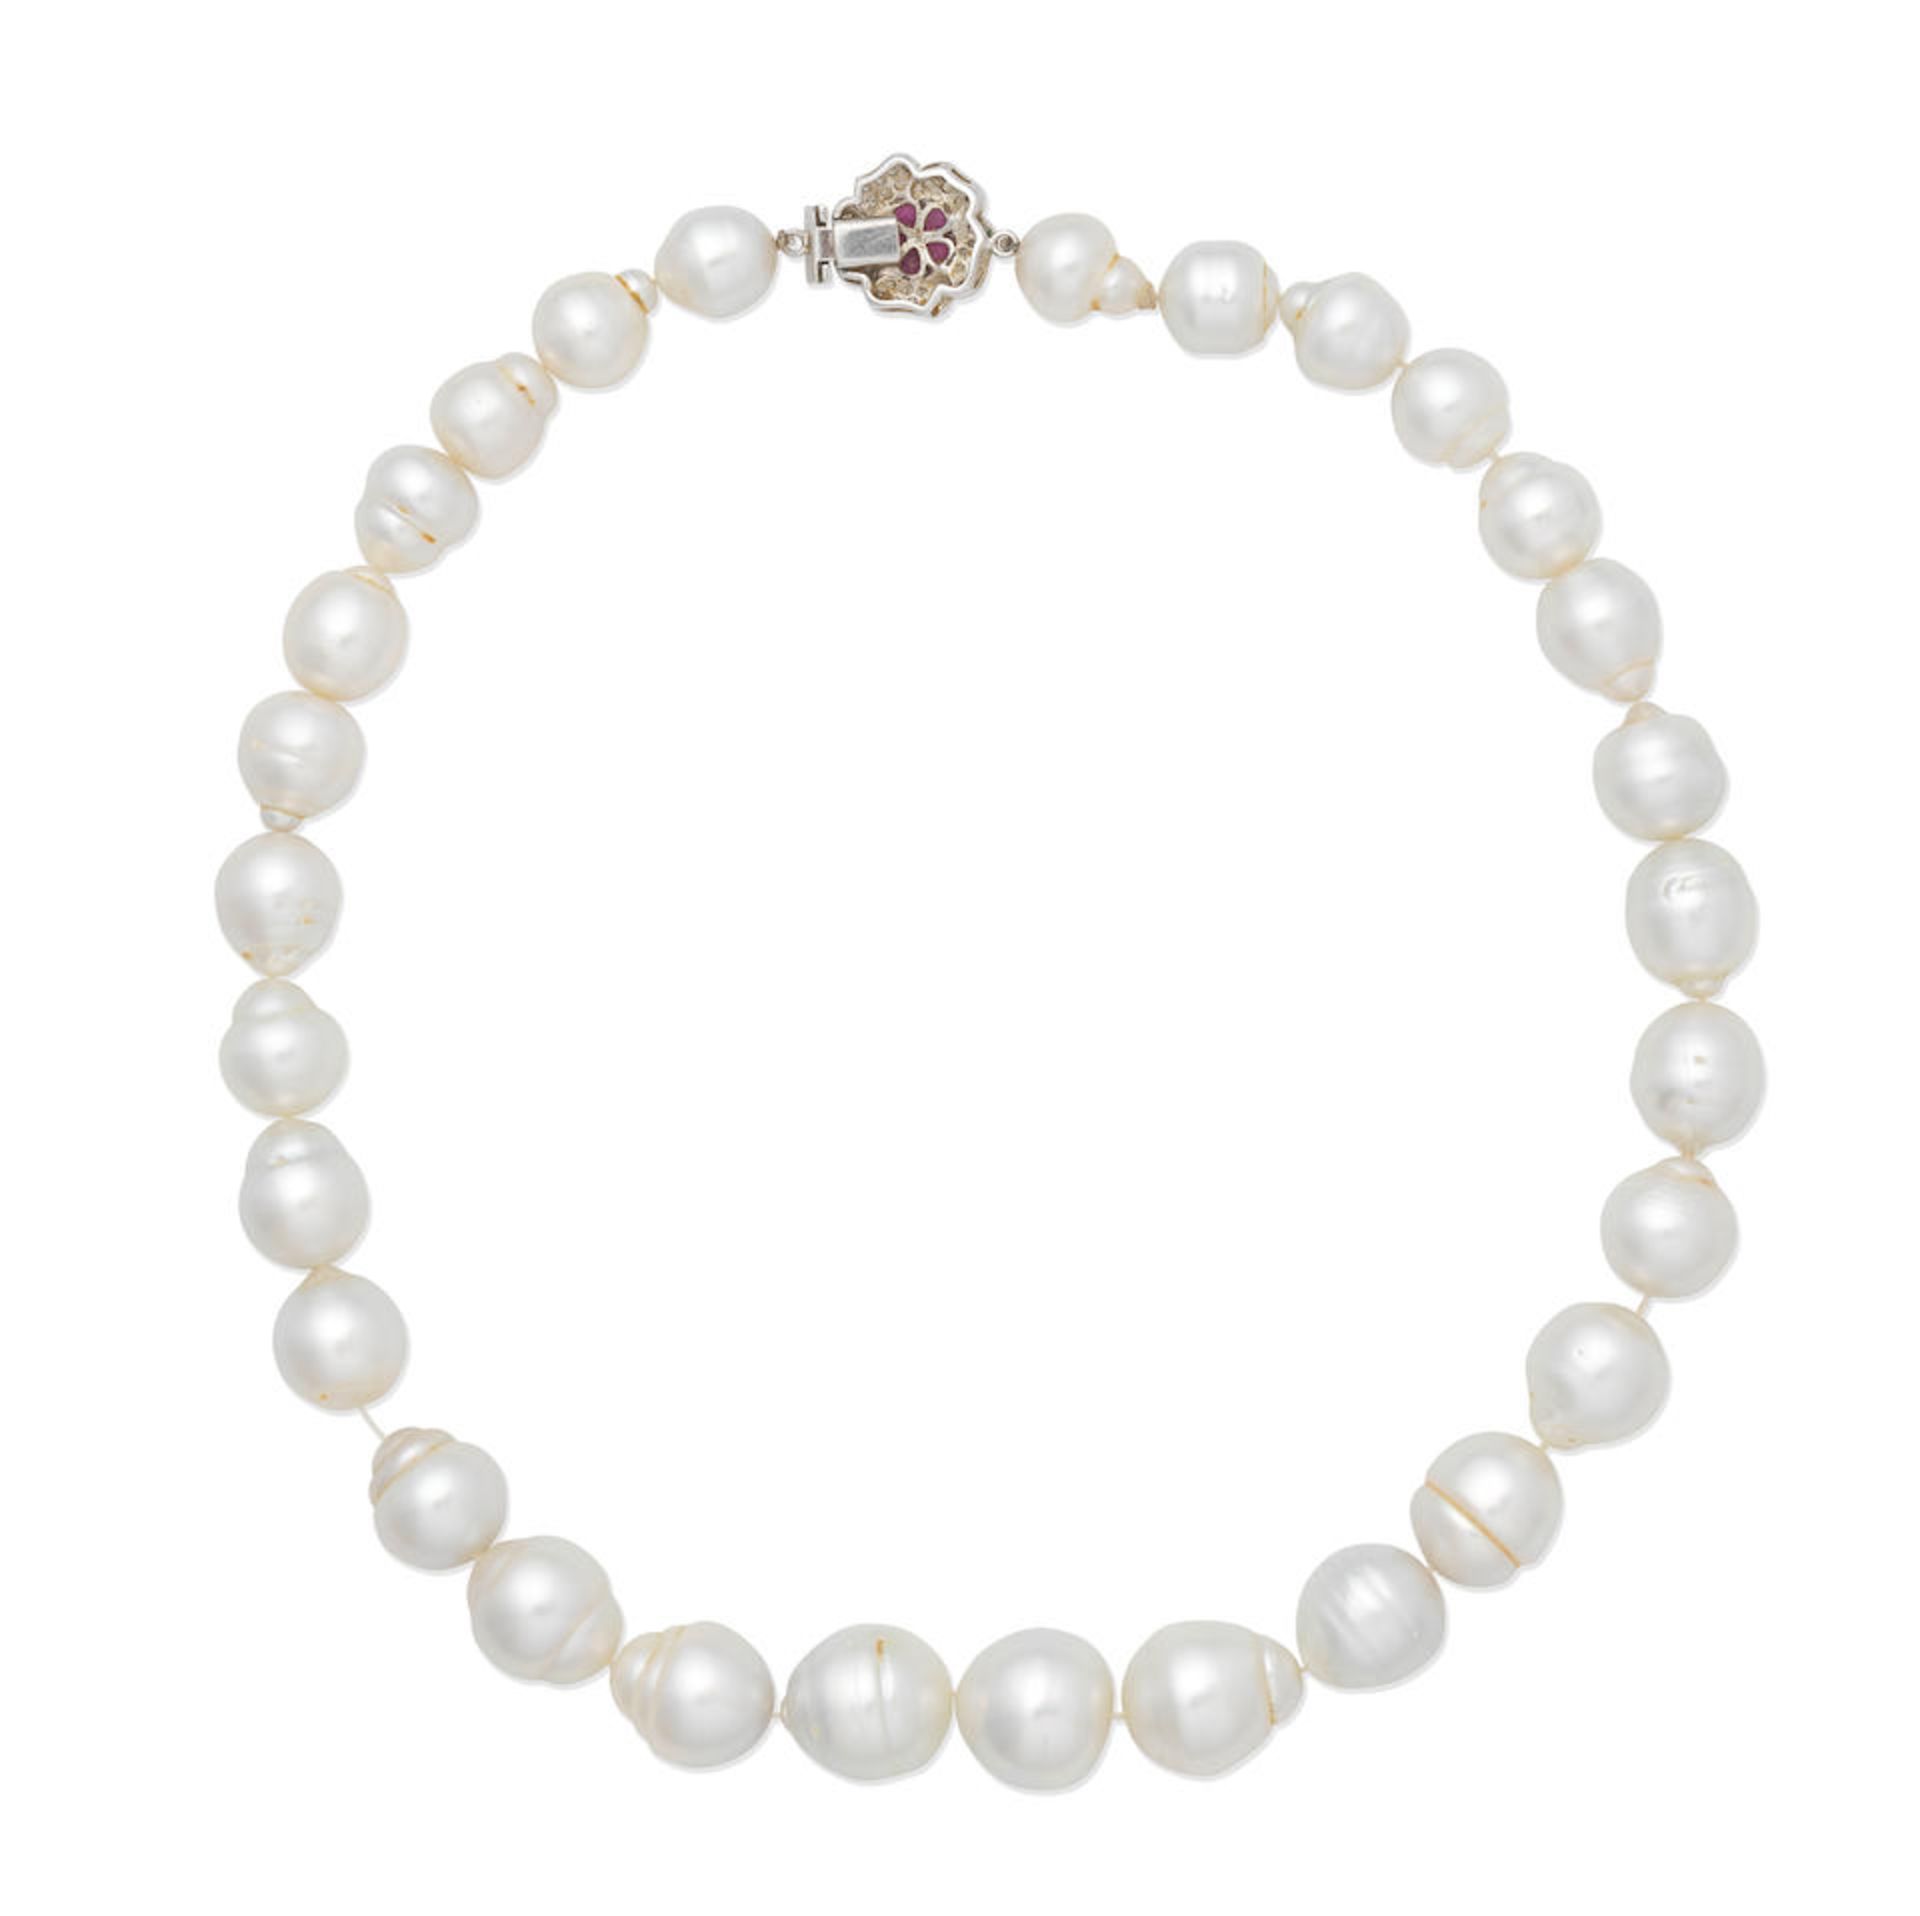 BAROQUE CULTURED PEARL NECKLACE WITH GEM-SET CLASP - Image 2 of 2